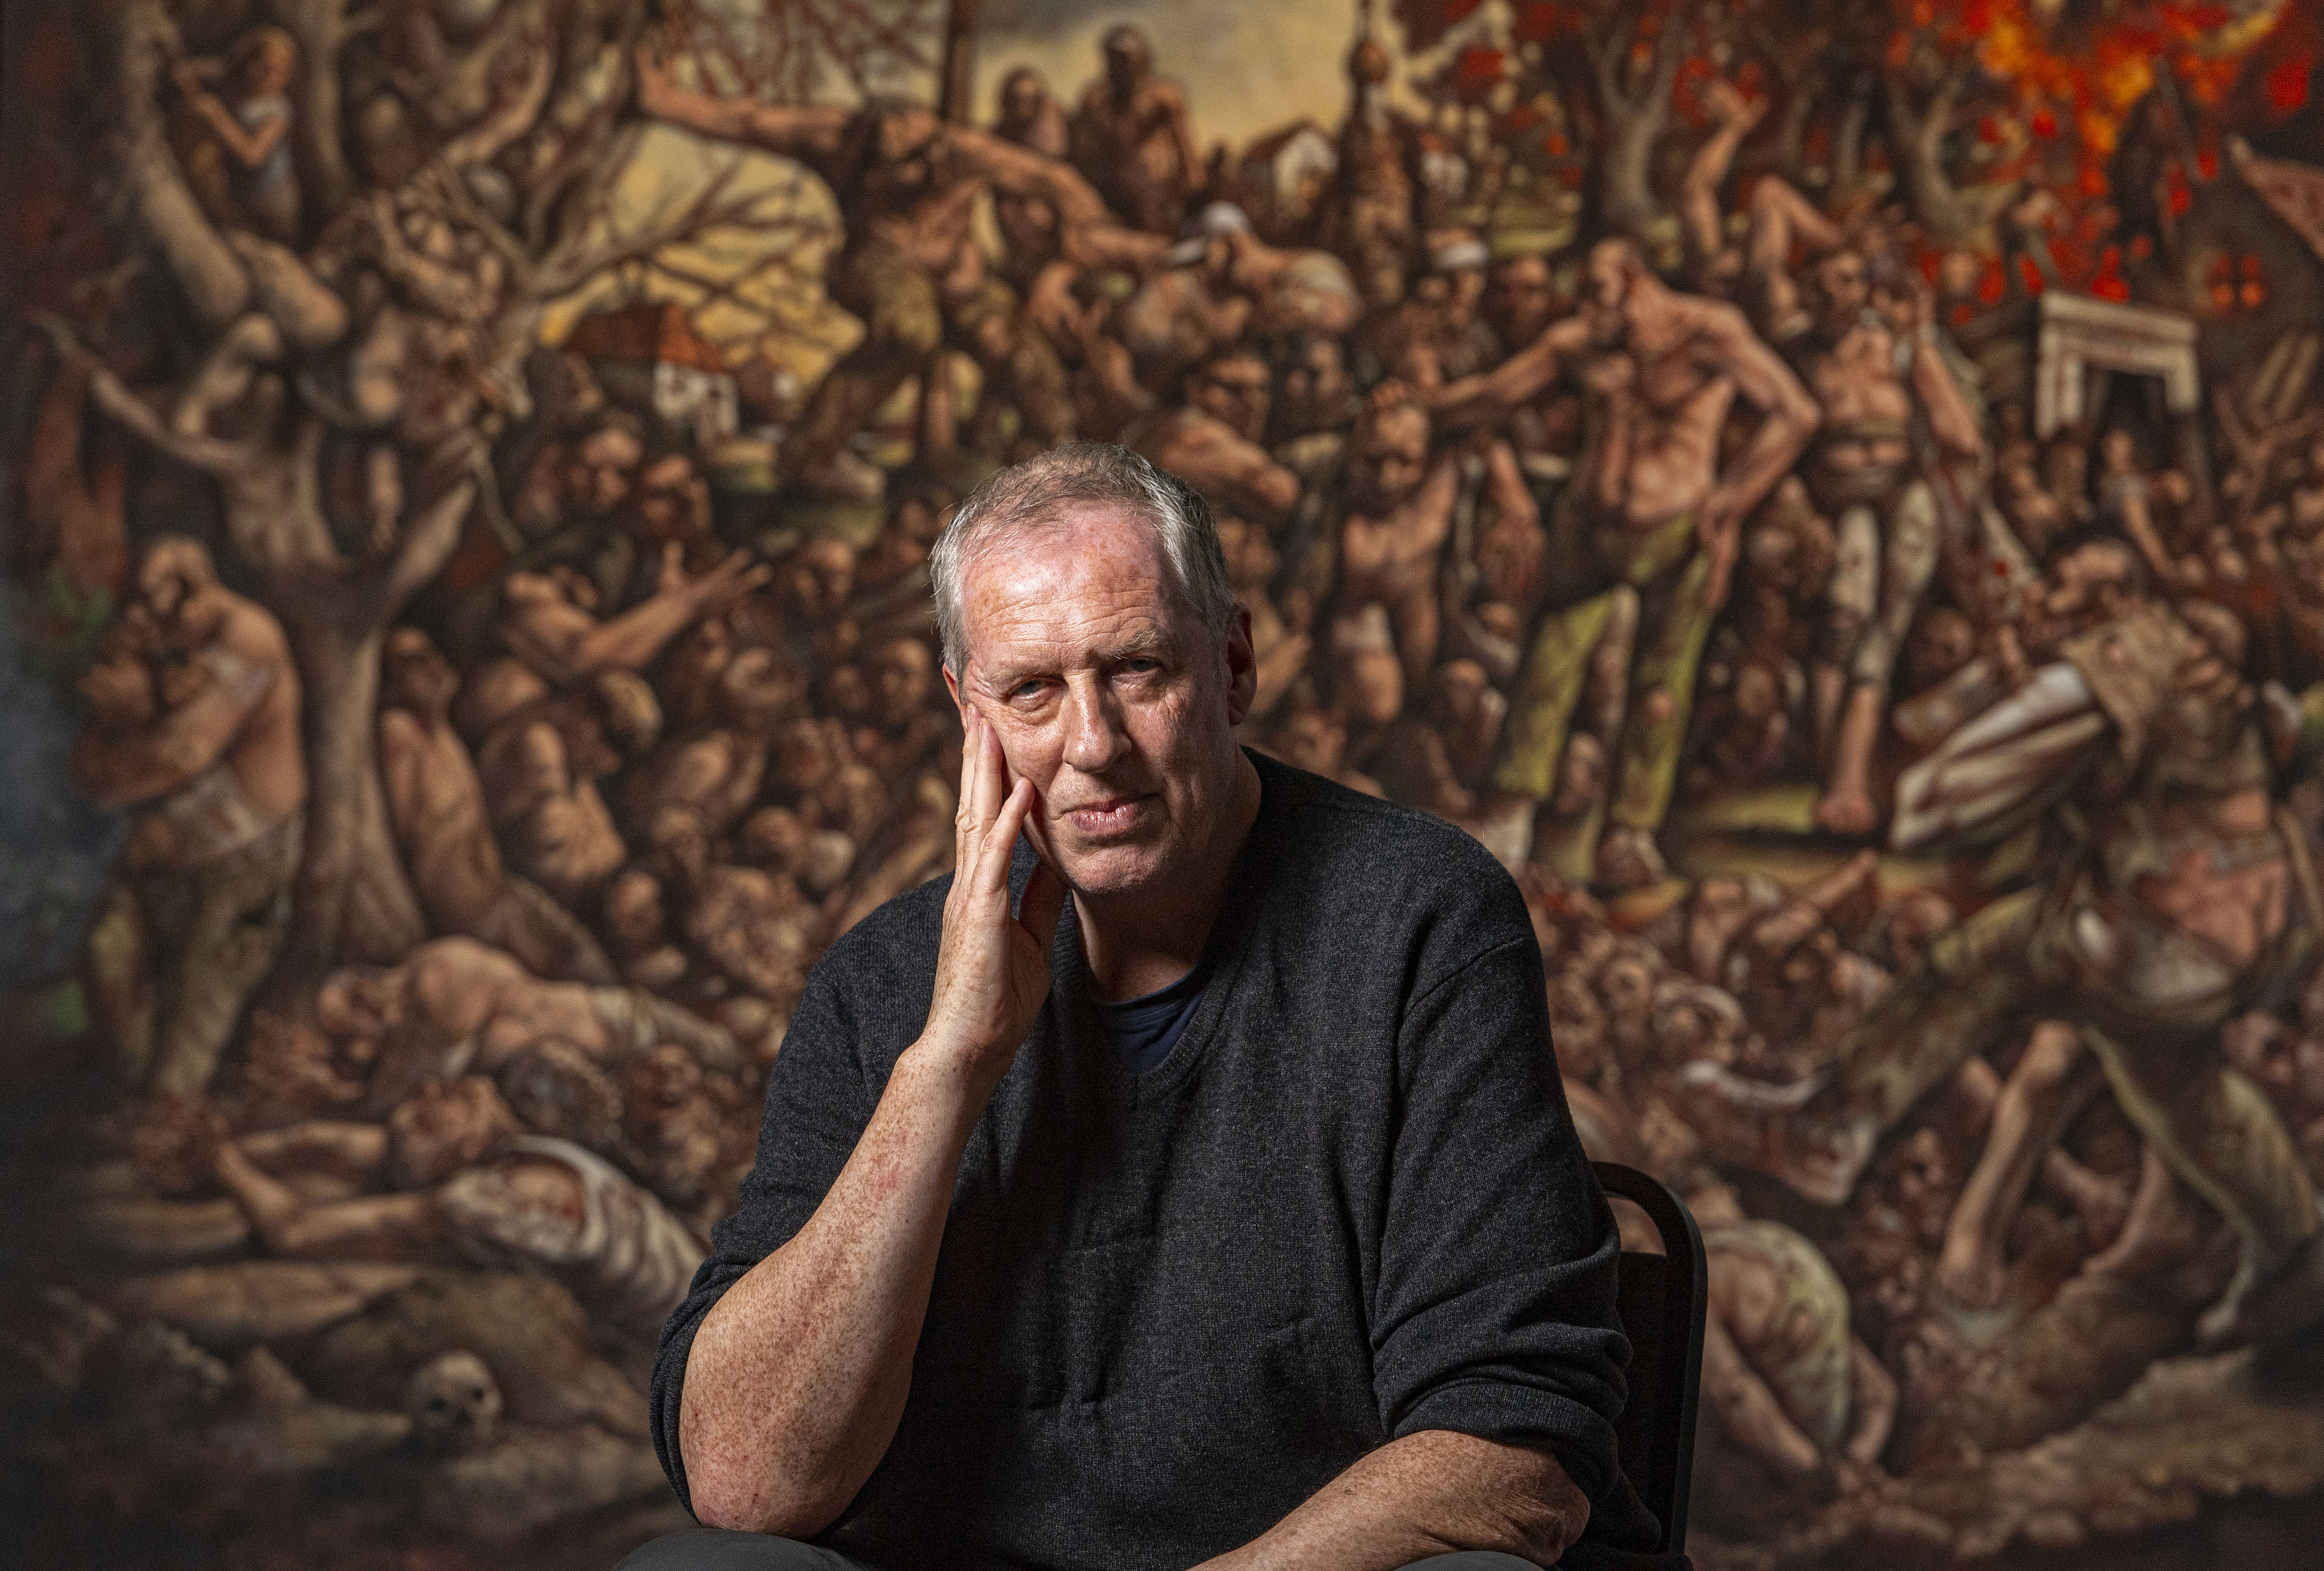 Artist Peter Howson unveils a new painting at St Mungo Museum, Glasgow to commemorate the 25th Anniversary of the Srebrenica Masscare